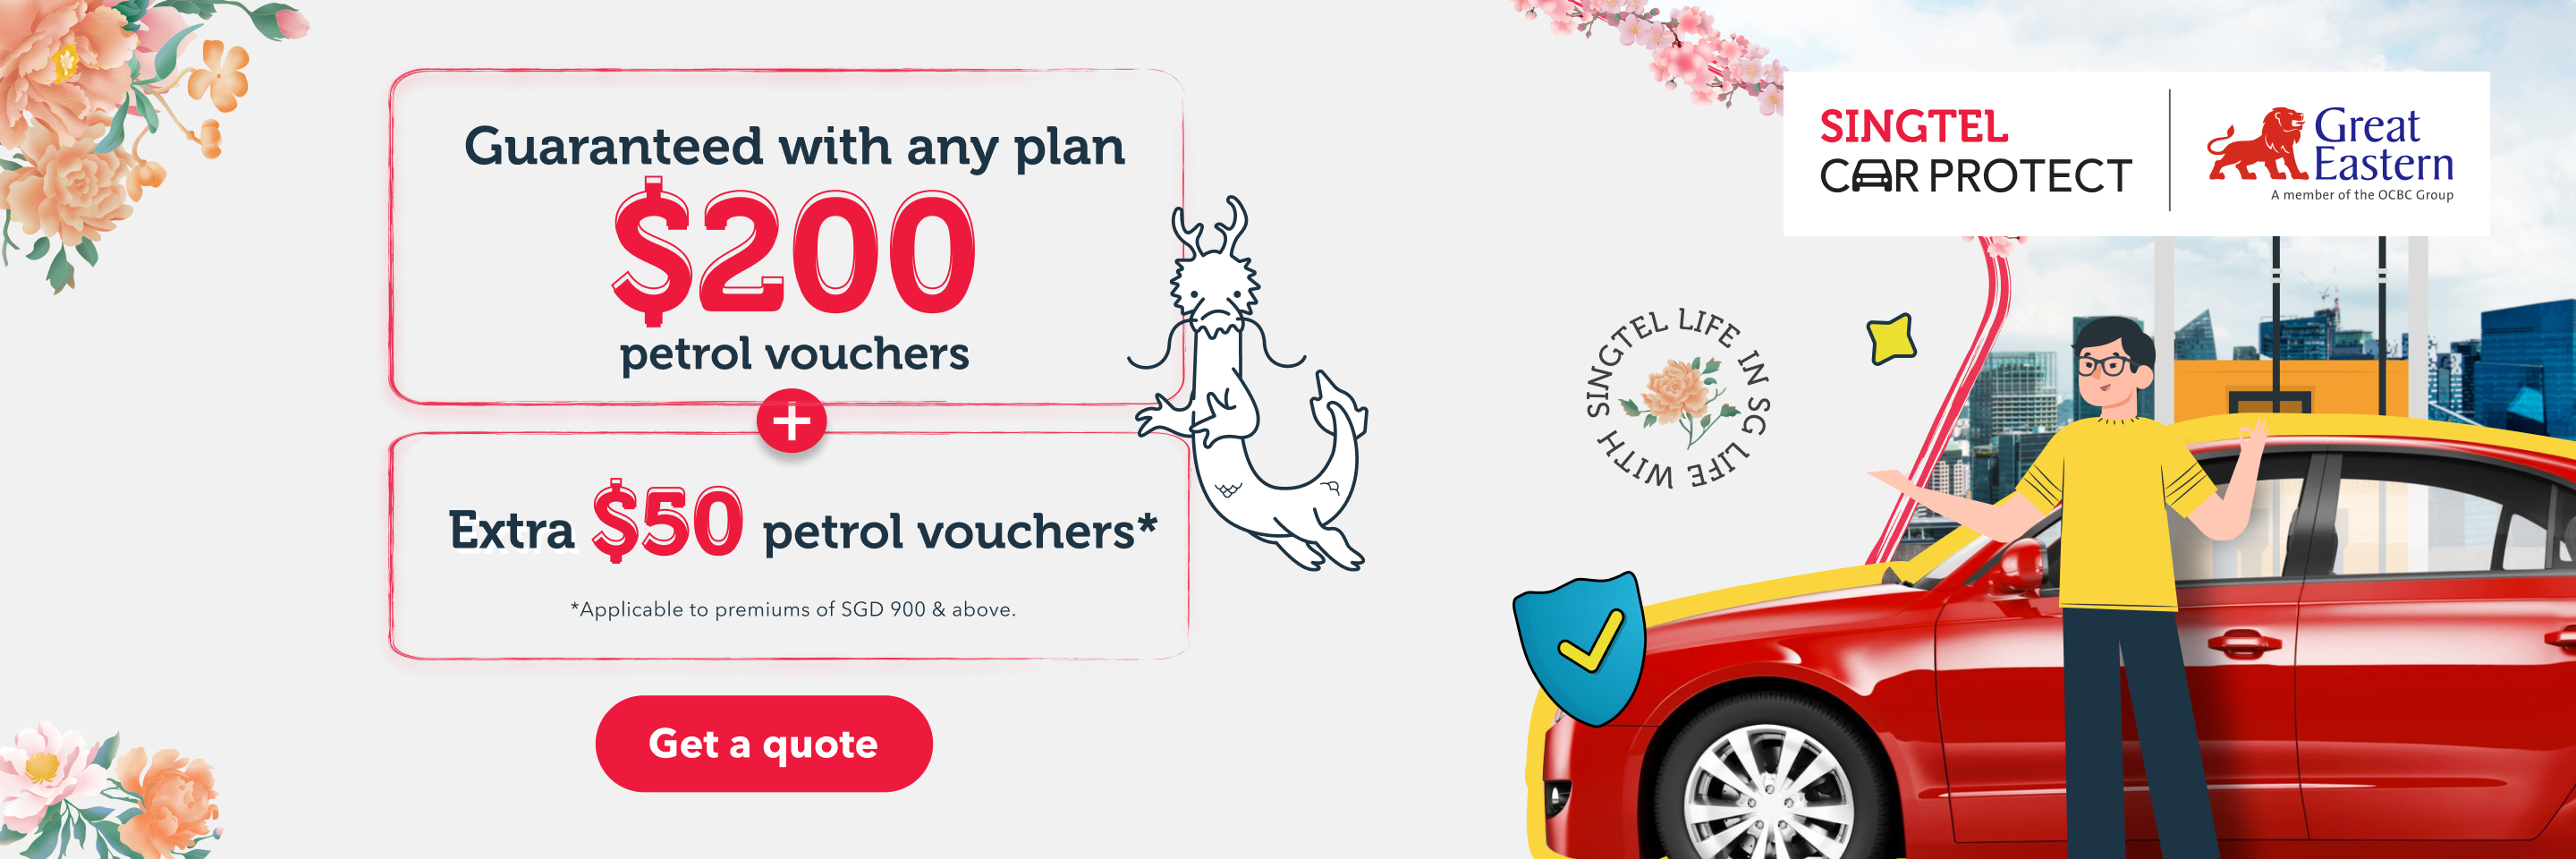 Singtel Car Protect - Guanrateed $200 + extra $50 petrol vouchers